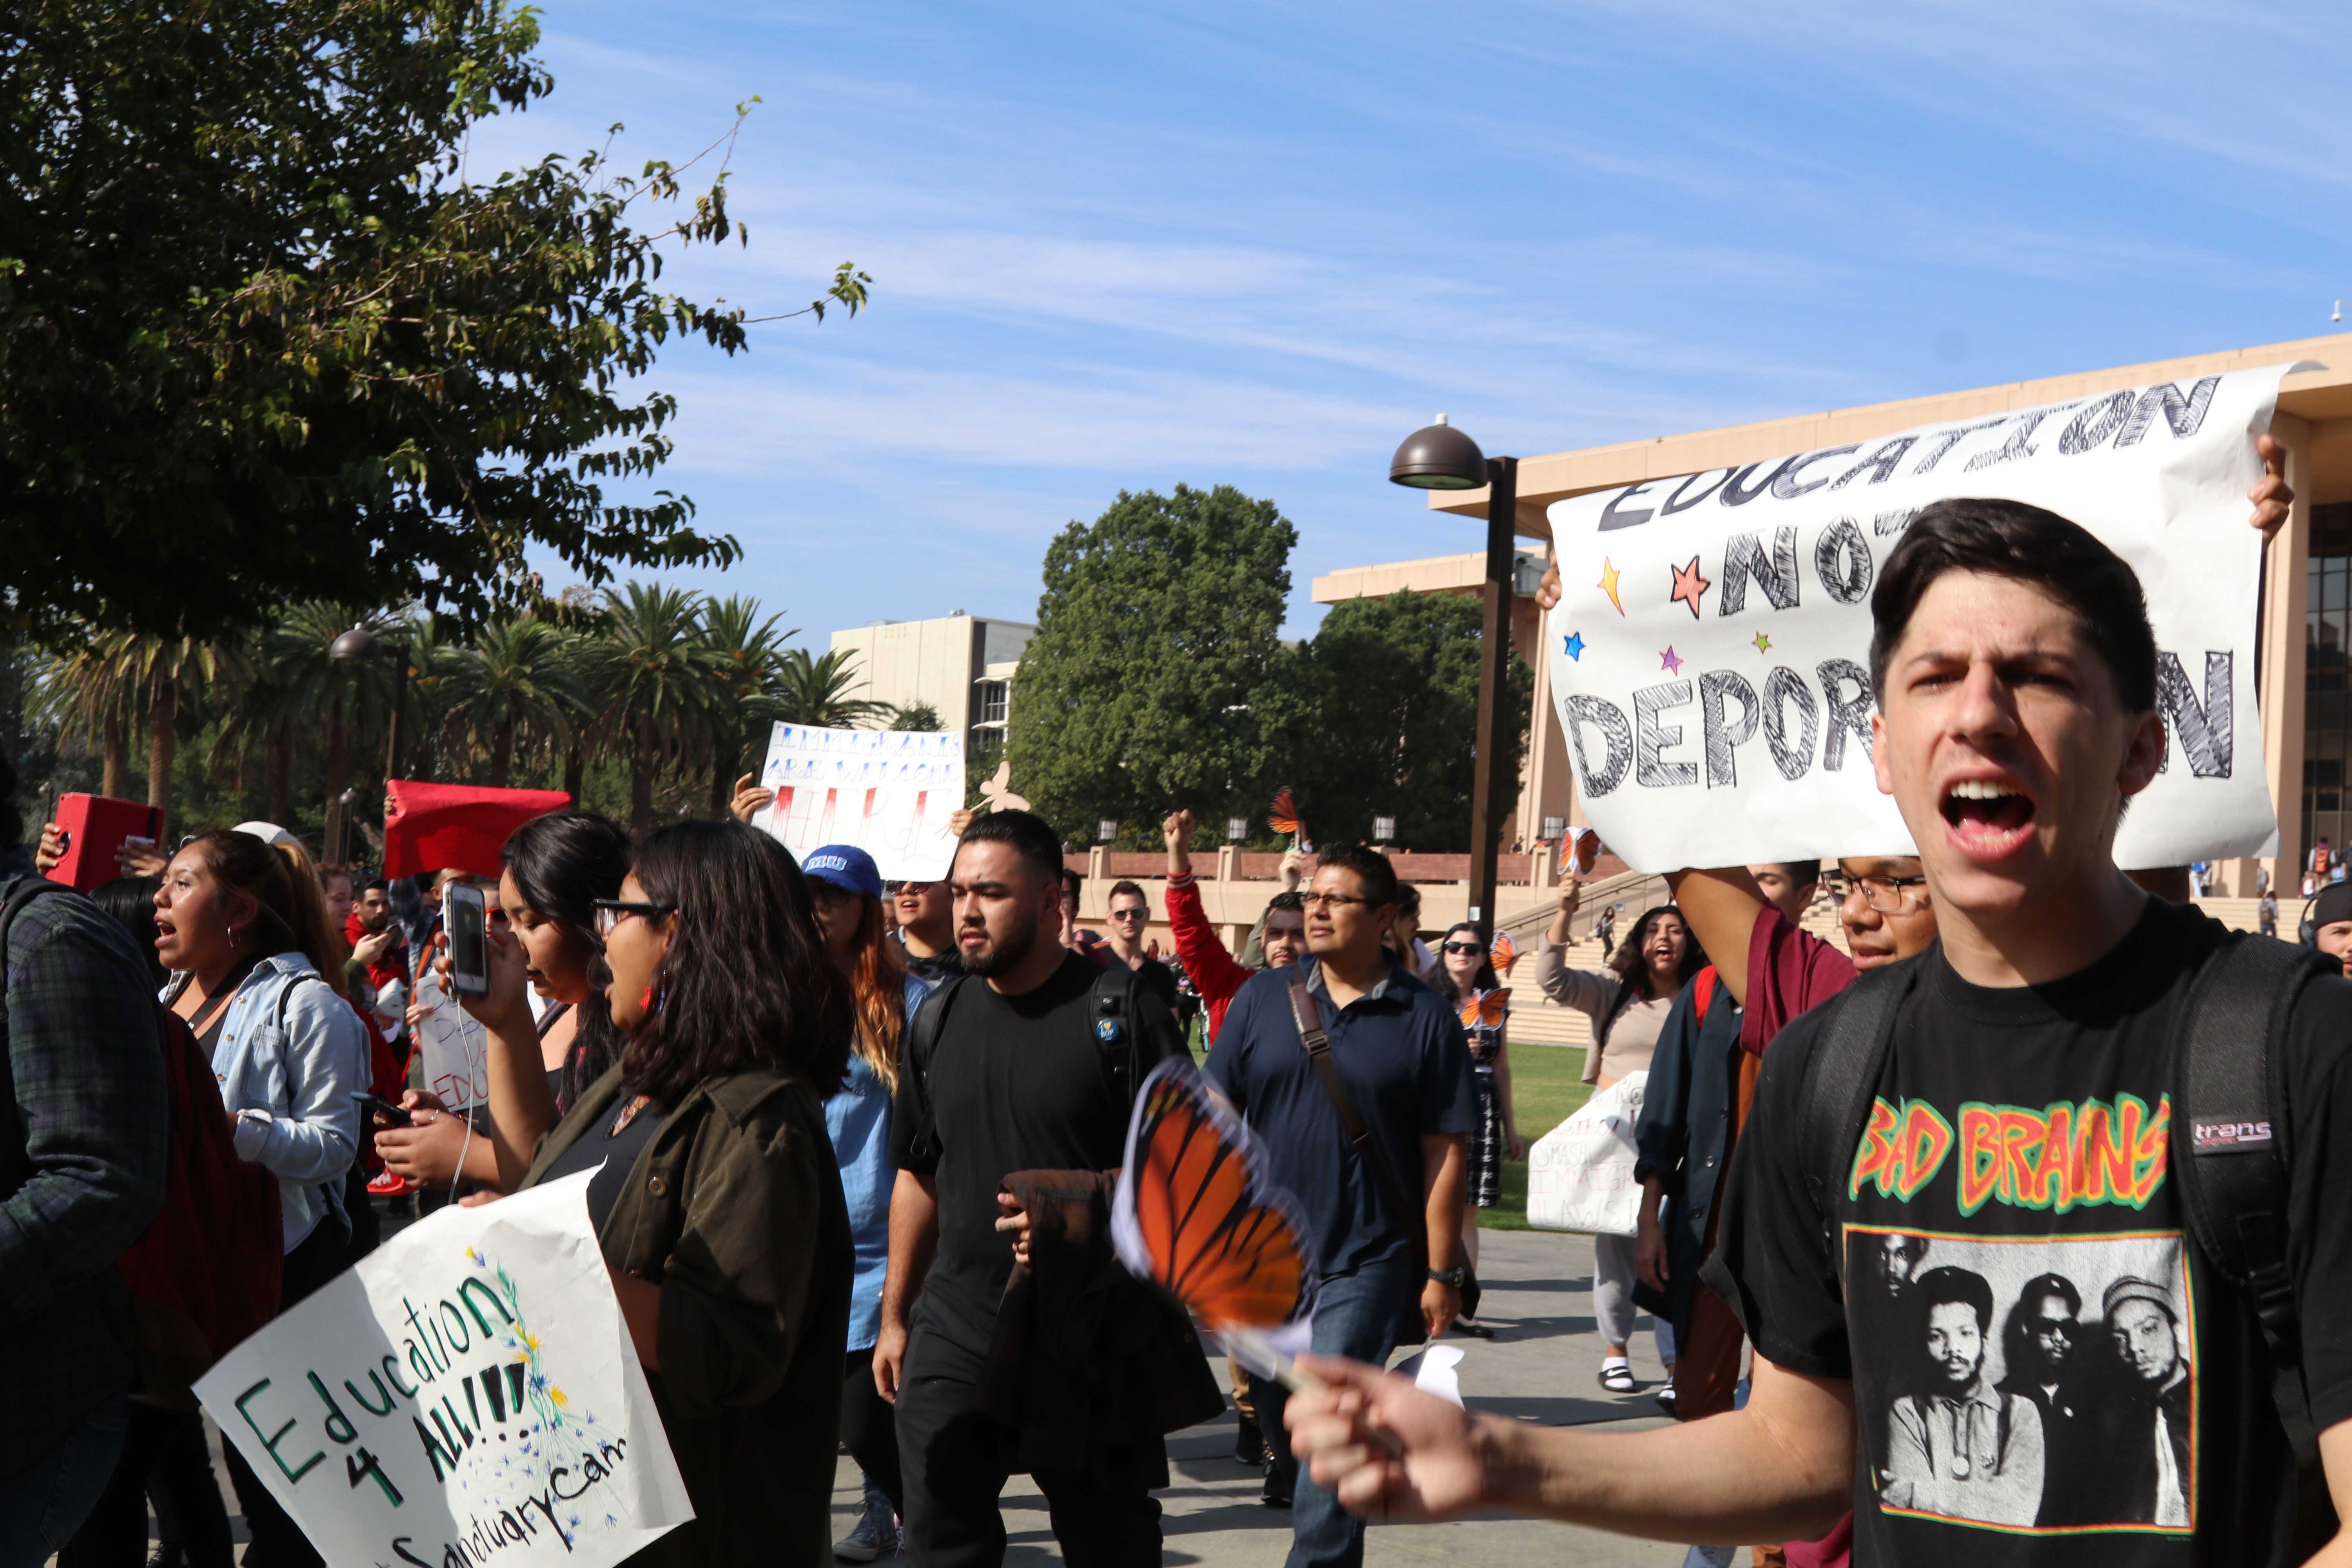 Protestors march in front of Oviatt Lawn around noon on Wednesday, calling for a safe campus for undocumented students. Photo credit: Blaise Scemama